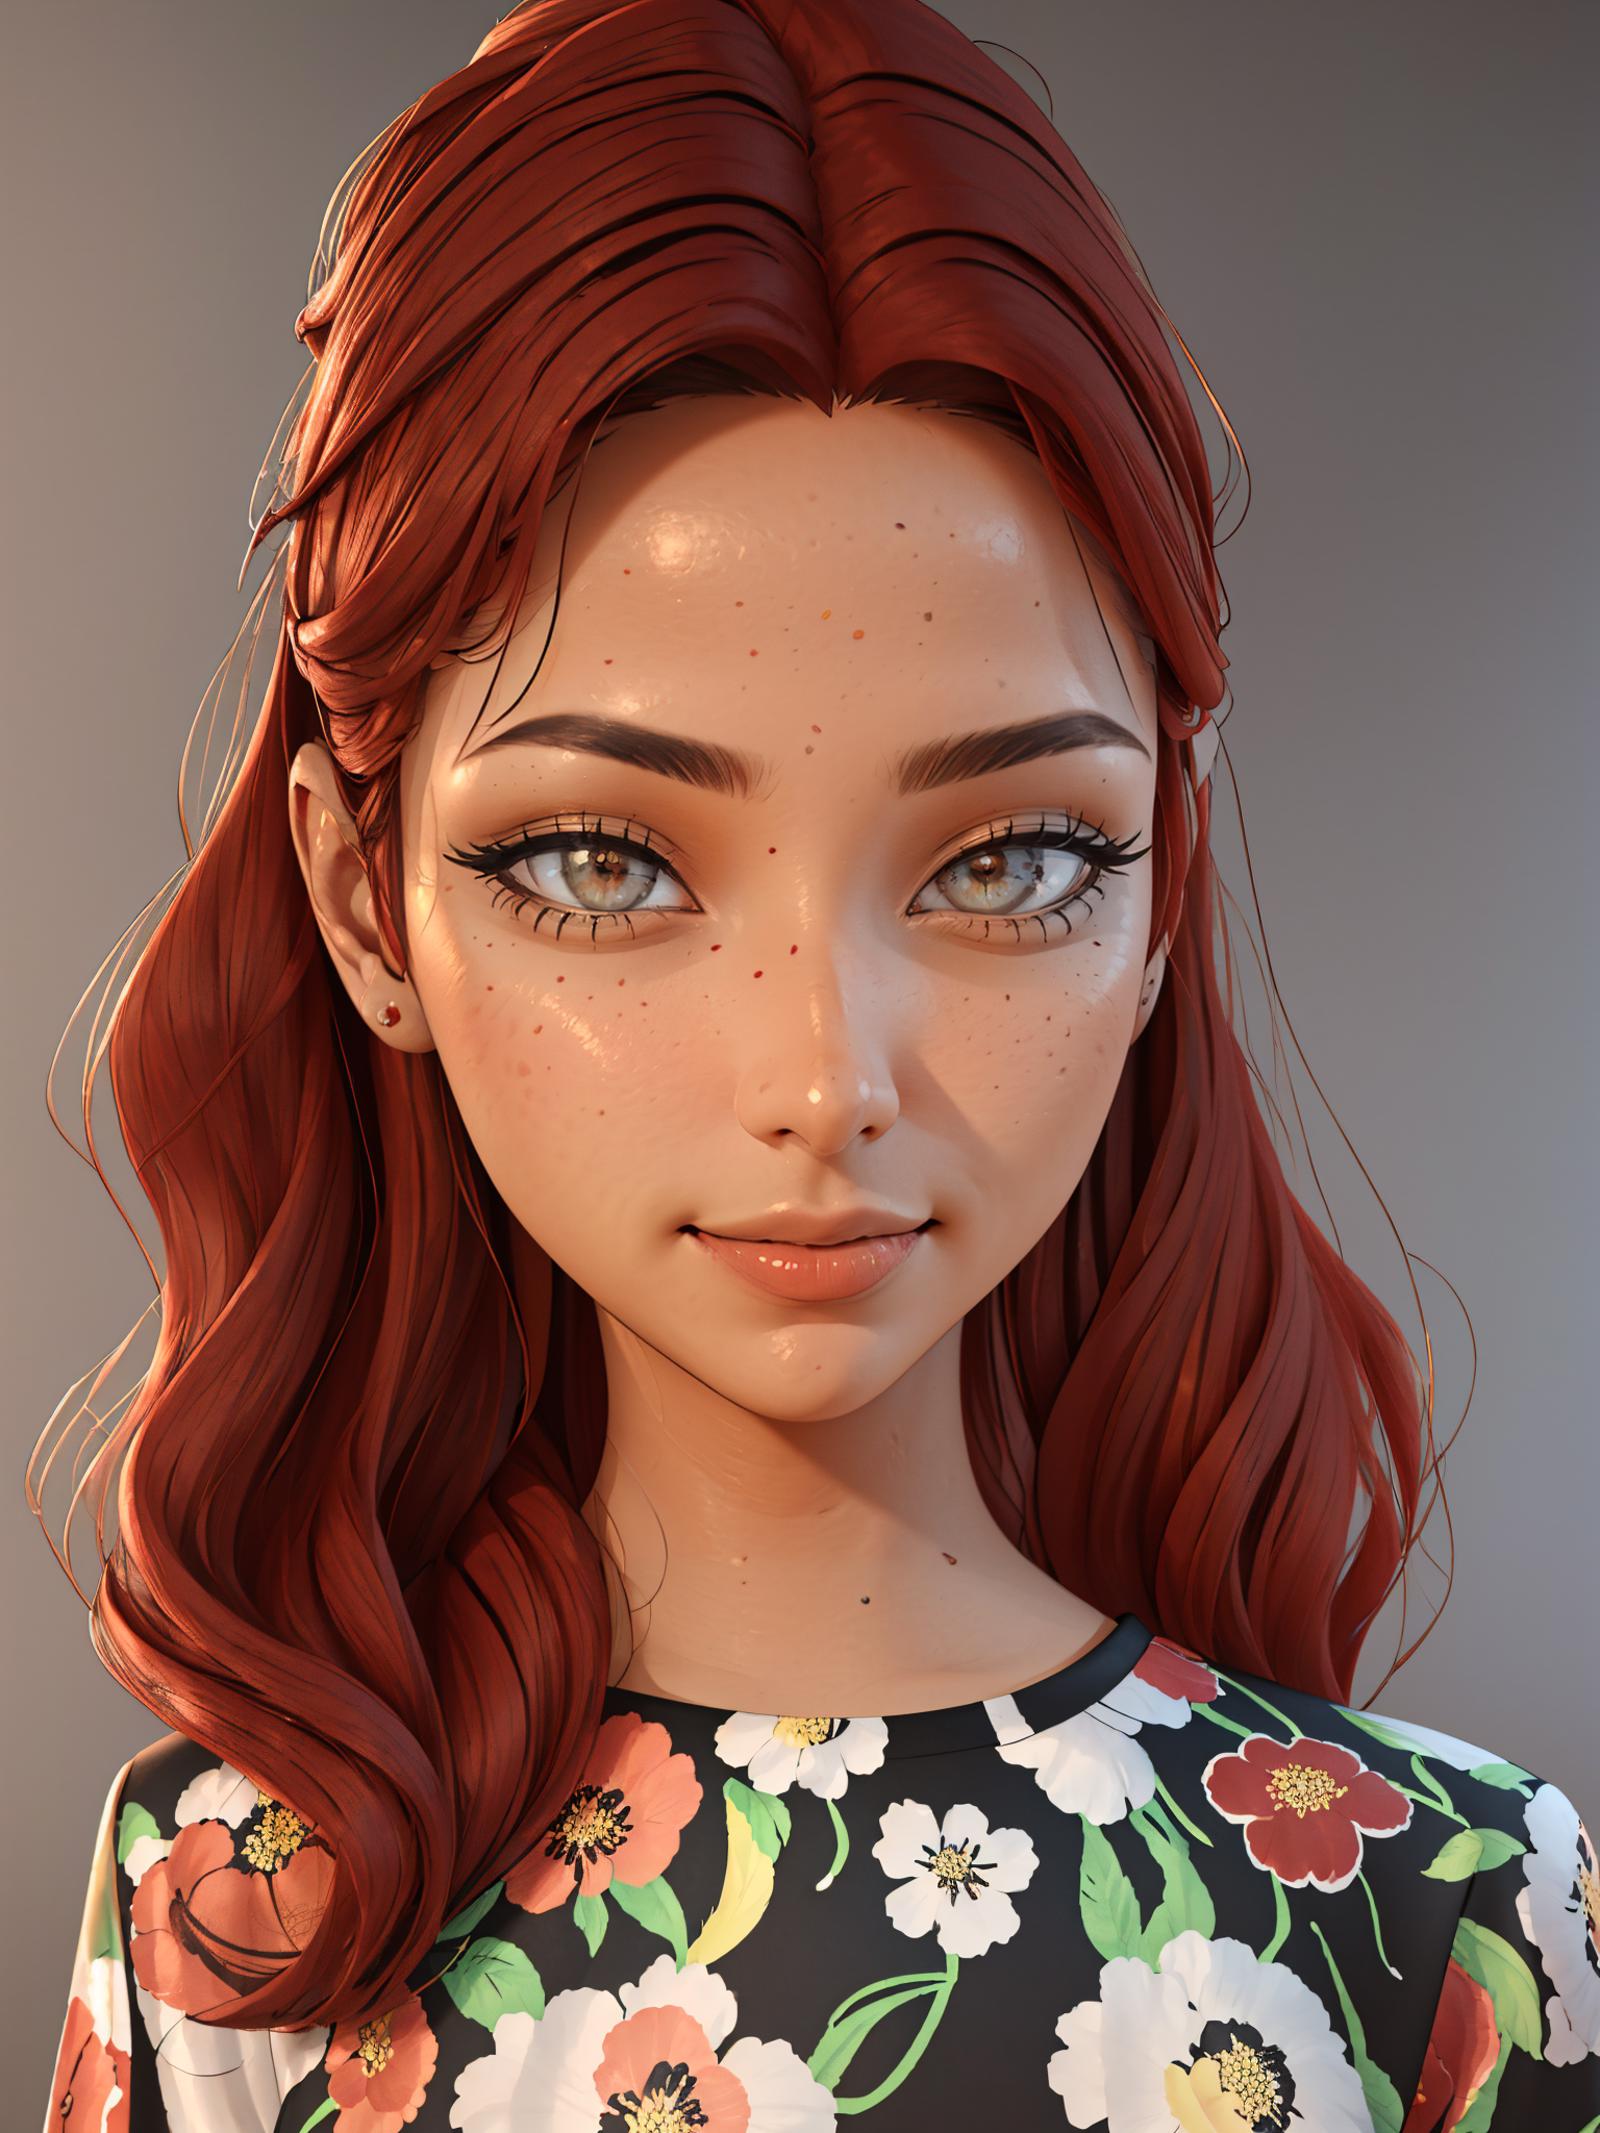 A 3D rendered image of a beautiful redhead woman wearing a floral print shirt.